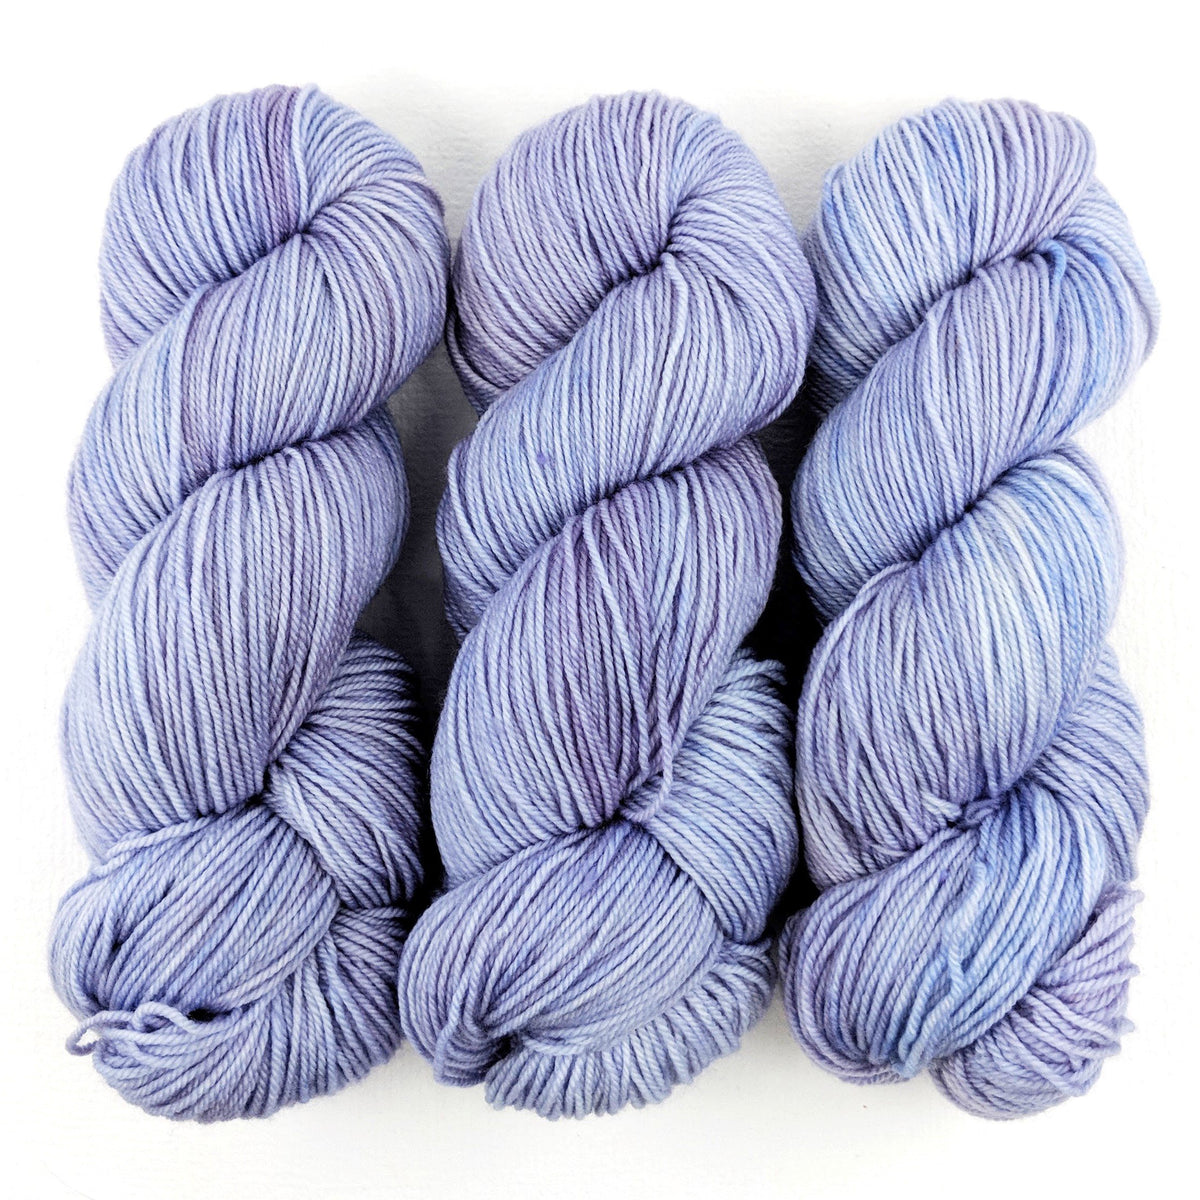 Lavender Cupcake - Revival Worsted - Dyed Stock